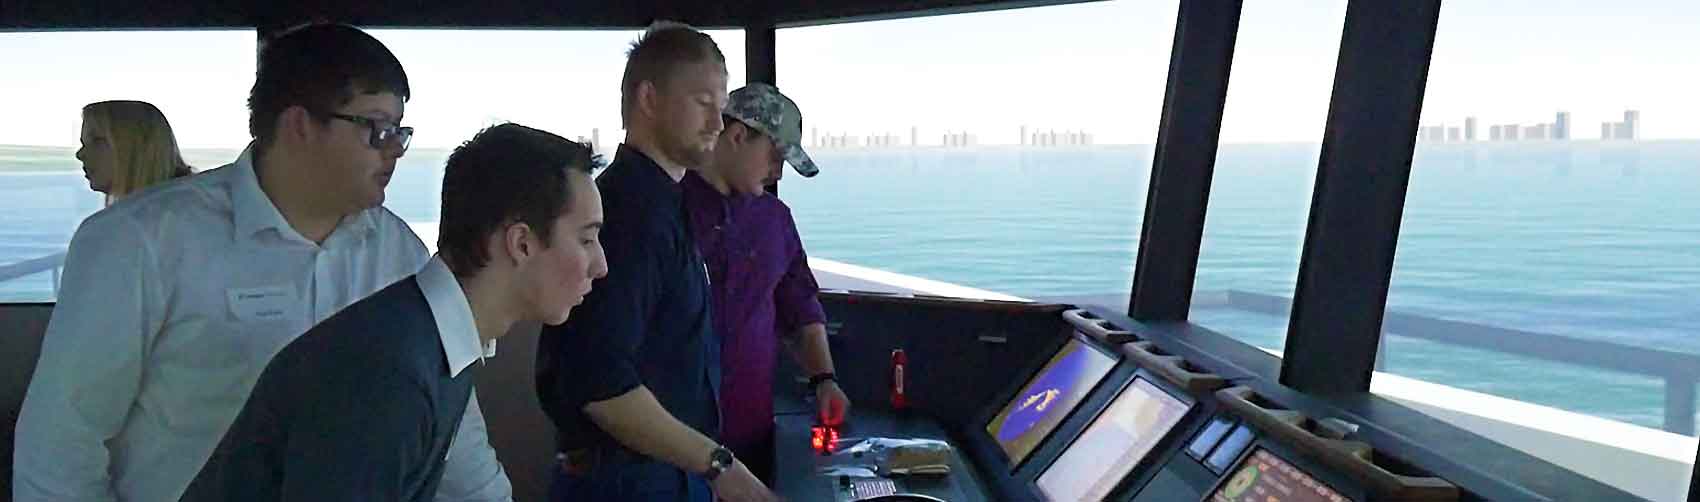 Students working in a commercial ship navigation simulator